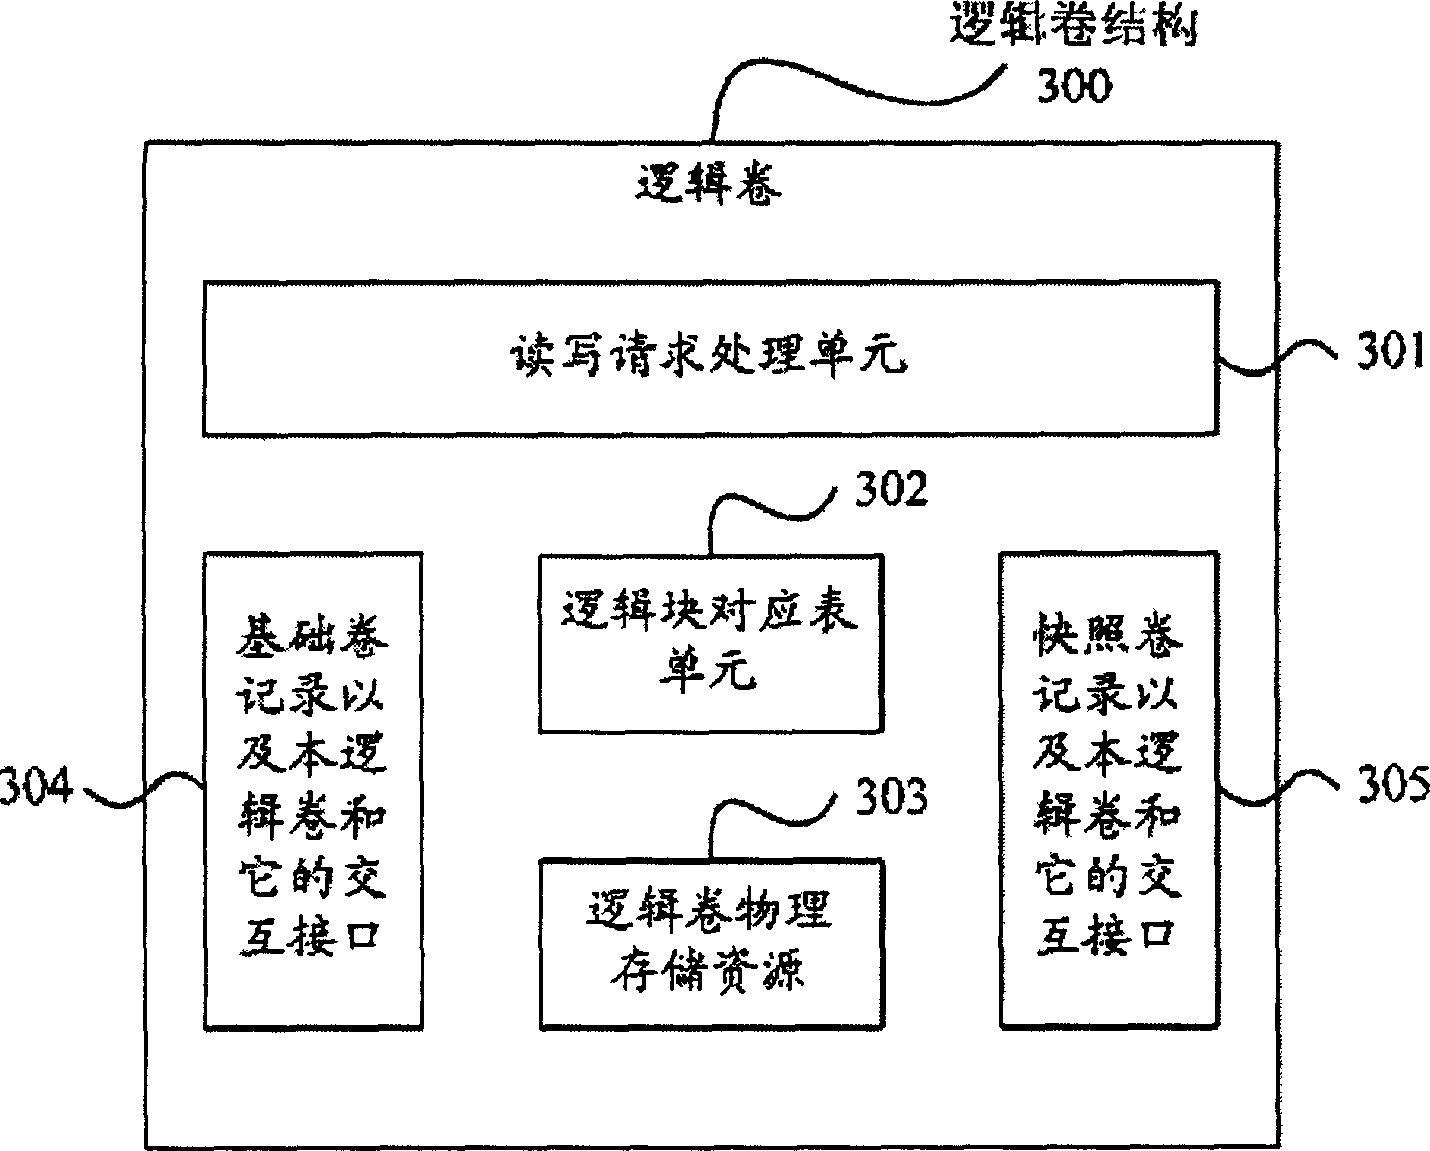 Fast photographic system and method